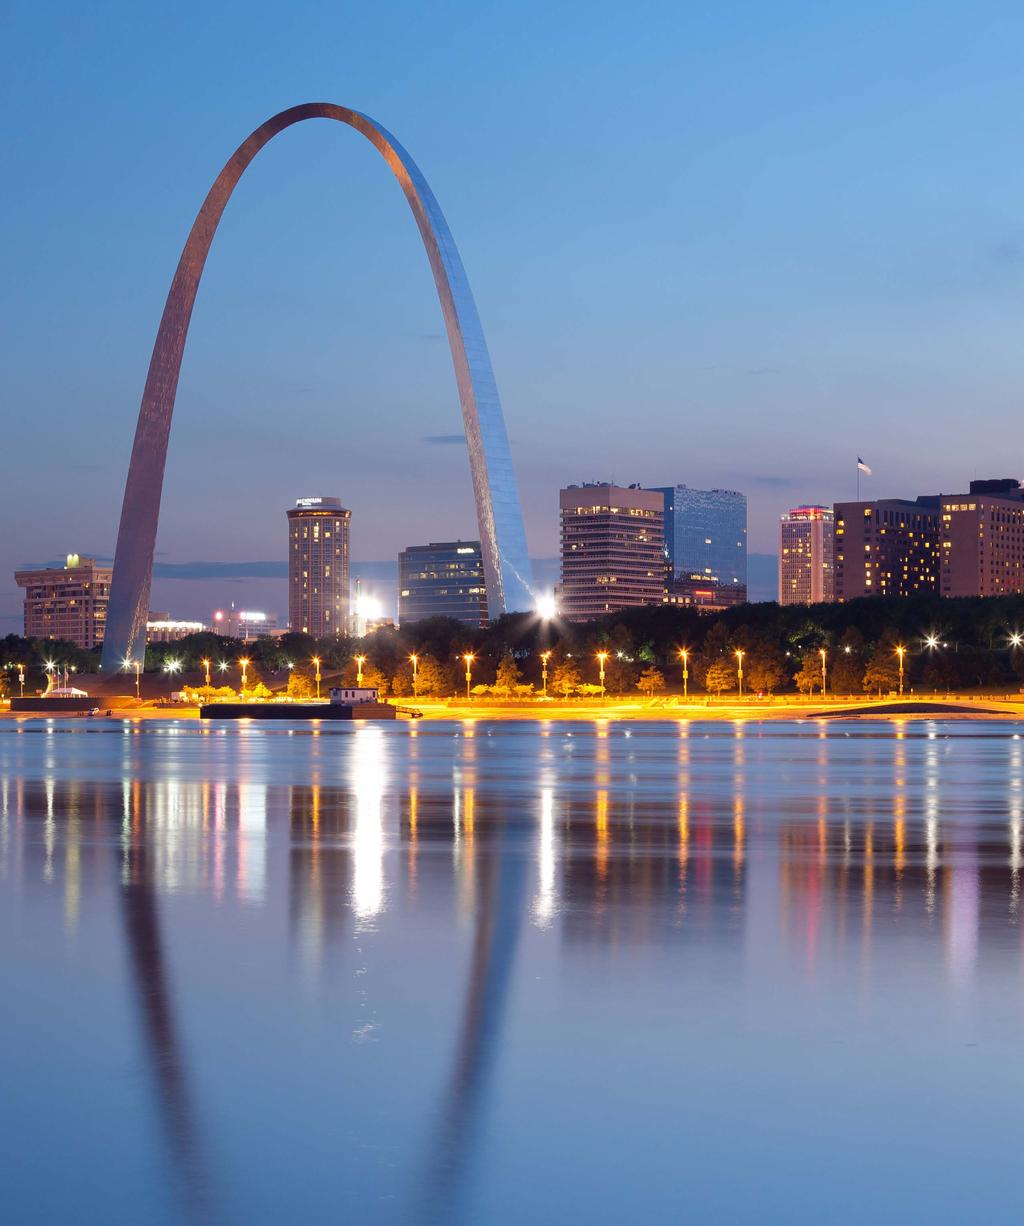 ST. LOUIS, MISSOURI JULY 21 - JULY 25, 2018 DEAR FRIENDS, I am honored to serve as your Chair for the 2017-2018 term, and I look forward to hosting the 72 nd Annual Meeting of the Southern